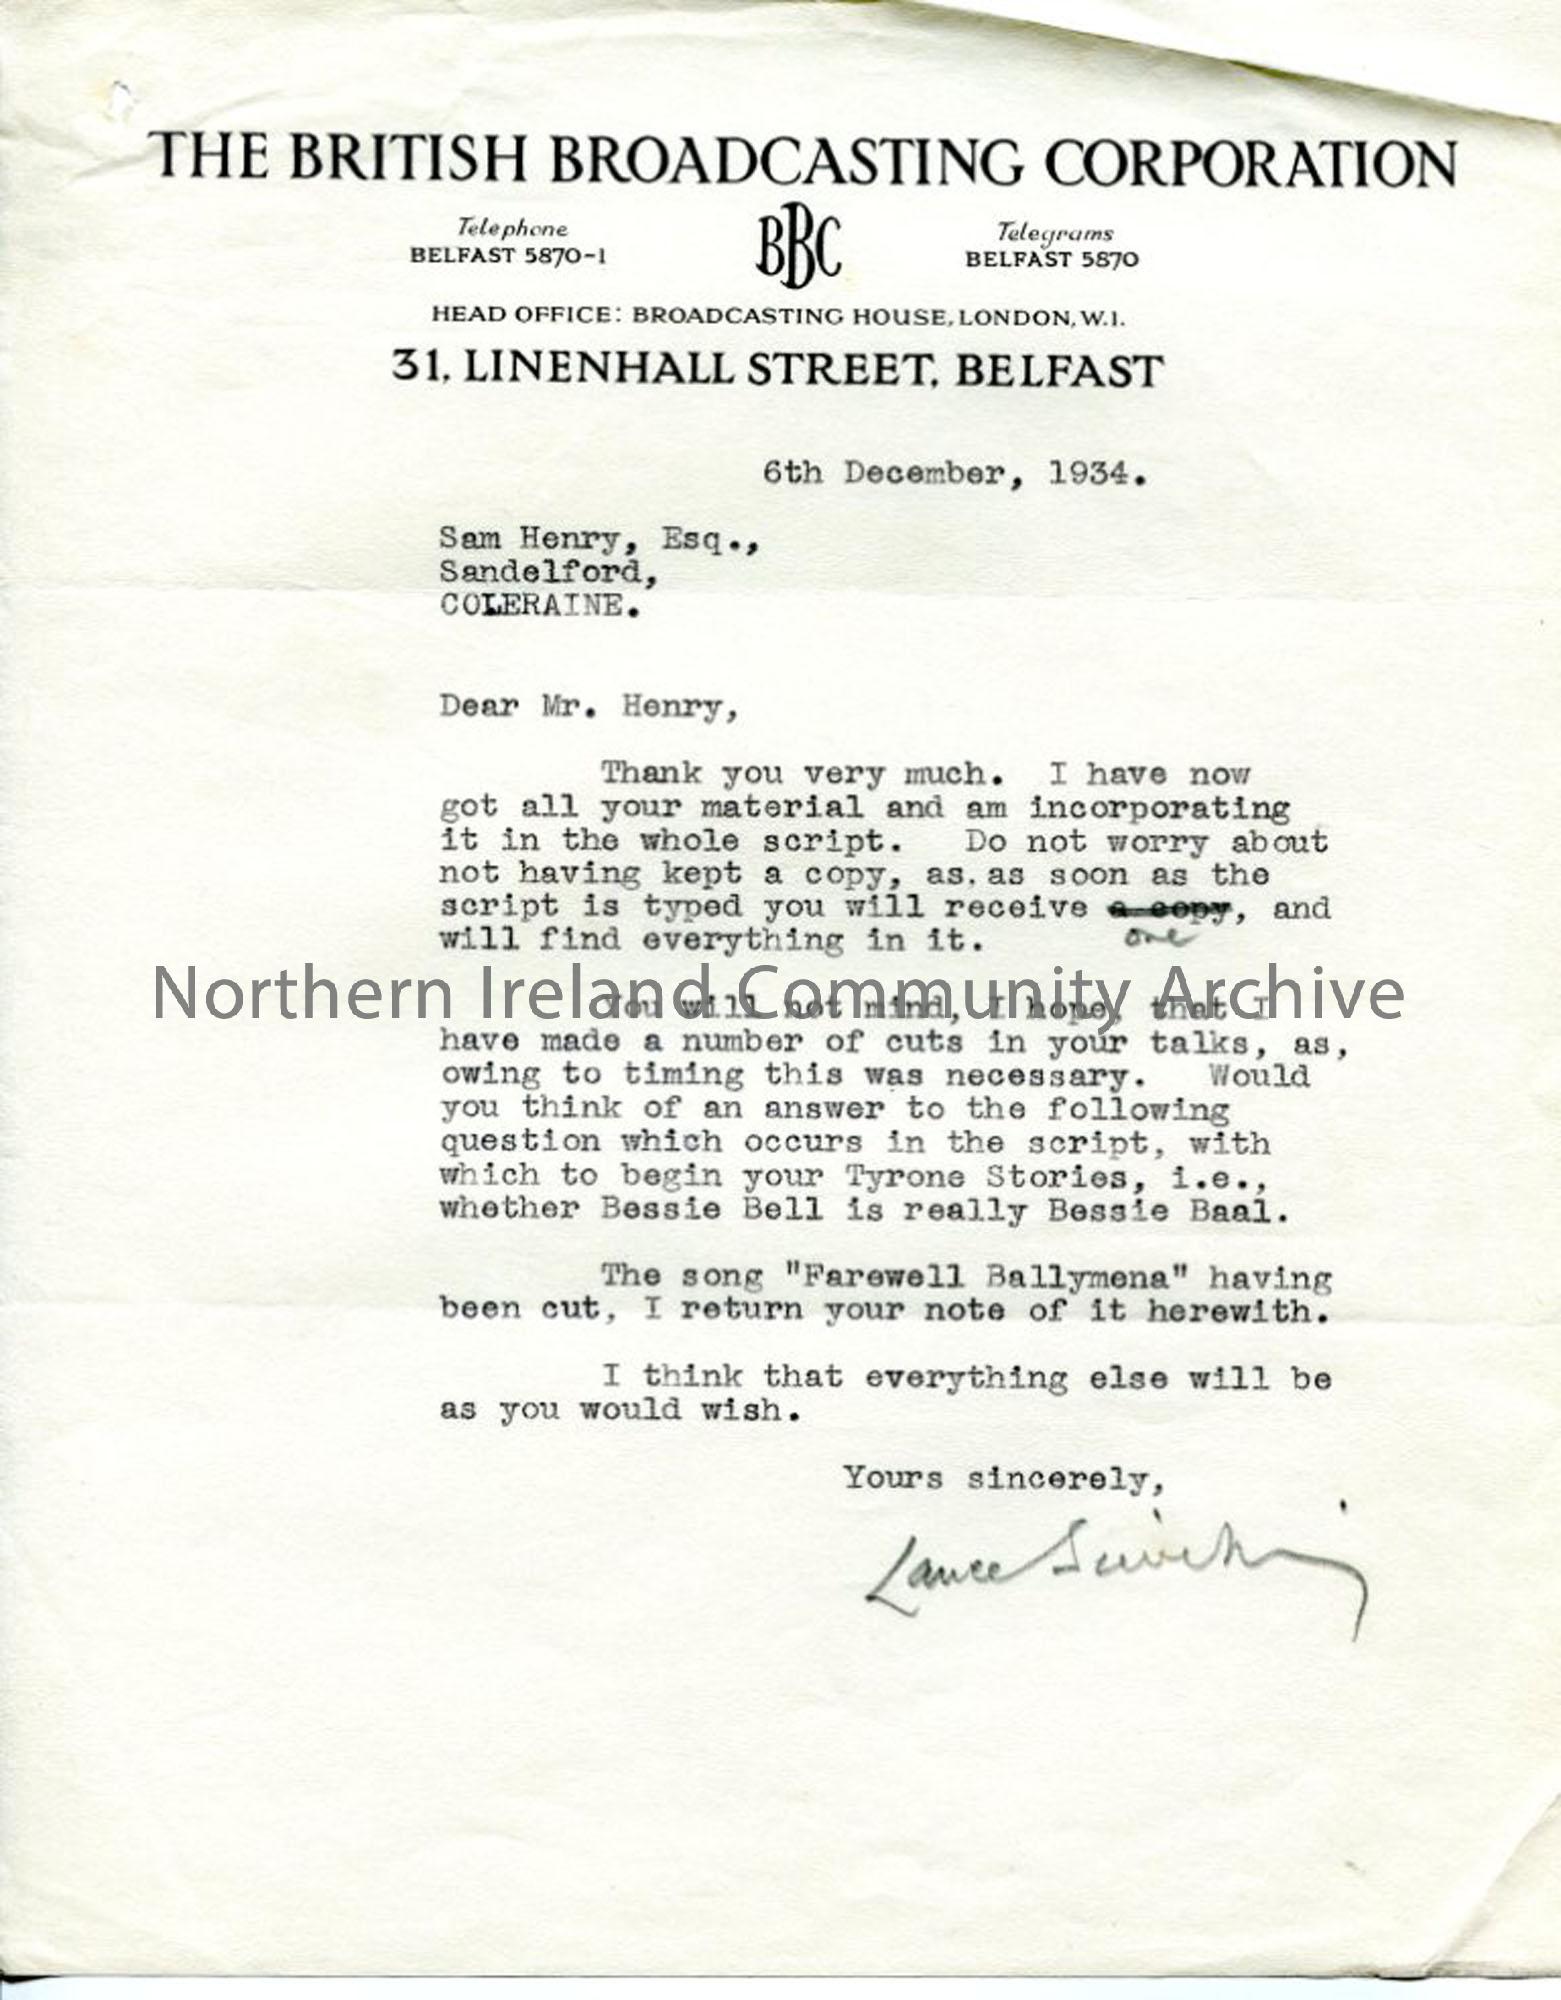 Letter from Lance Sieveking, dated 6.12.1934